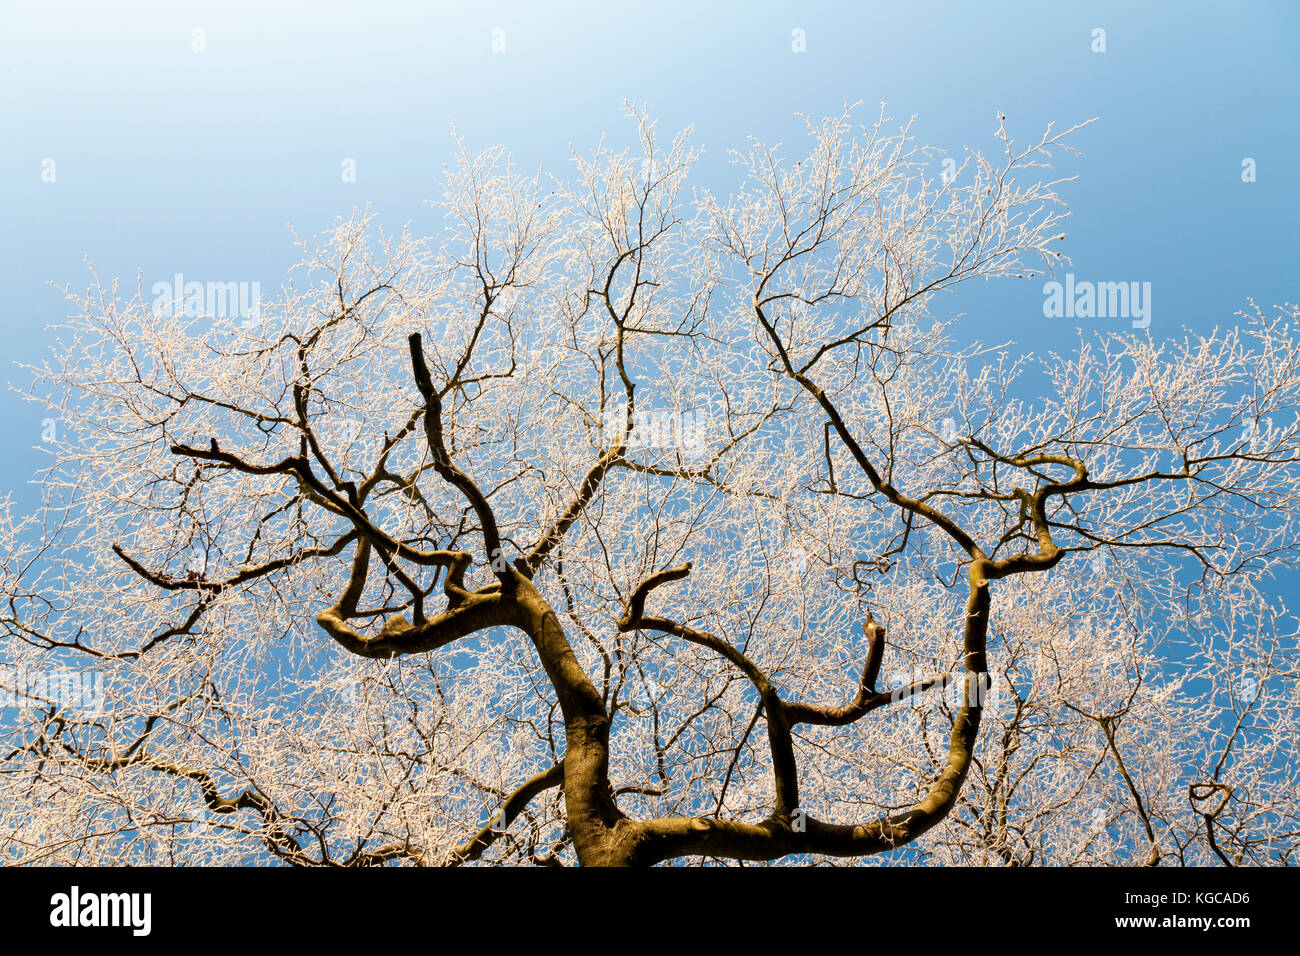 Top half of a wintry tree with frost covering every branch, clear bright blue sky in the background. Stock Photo